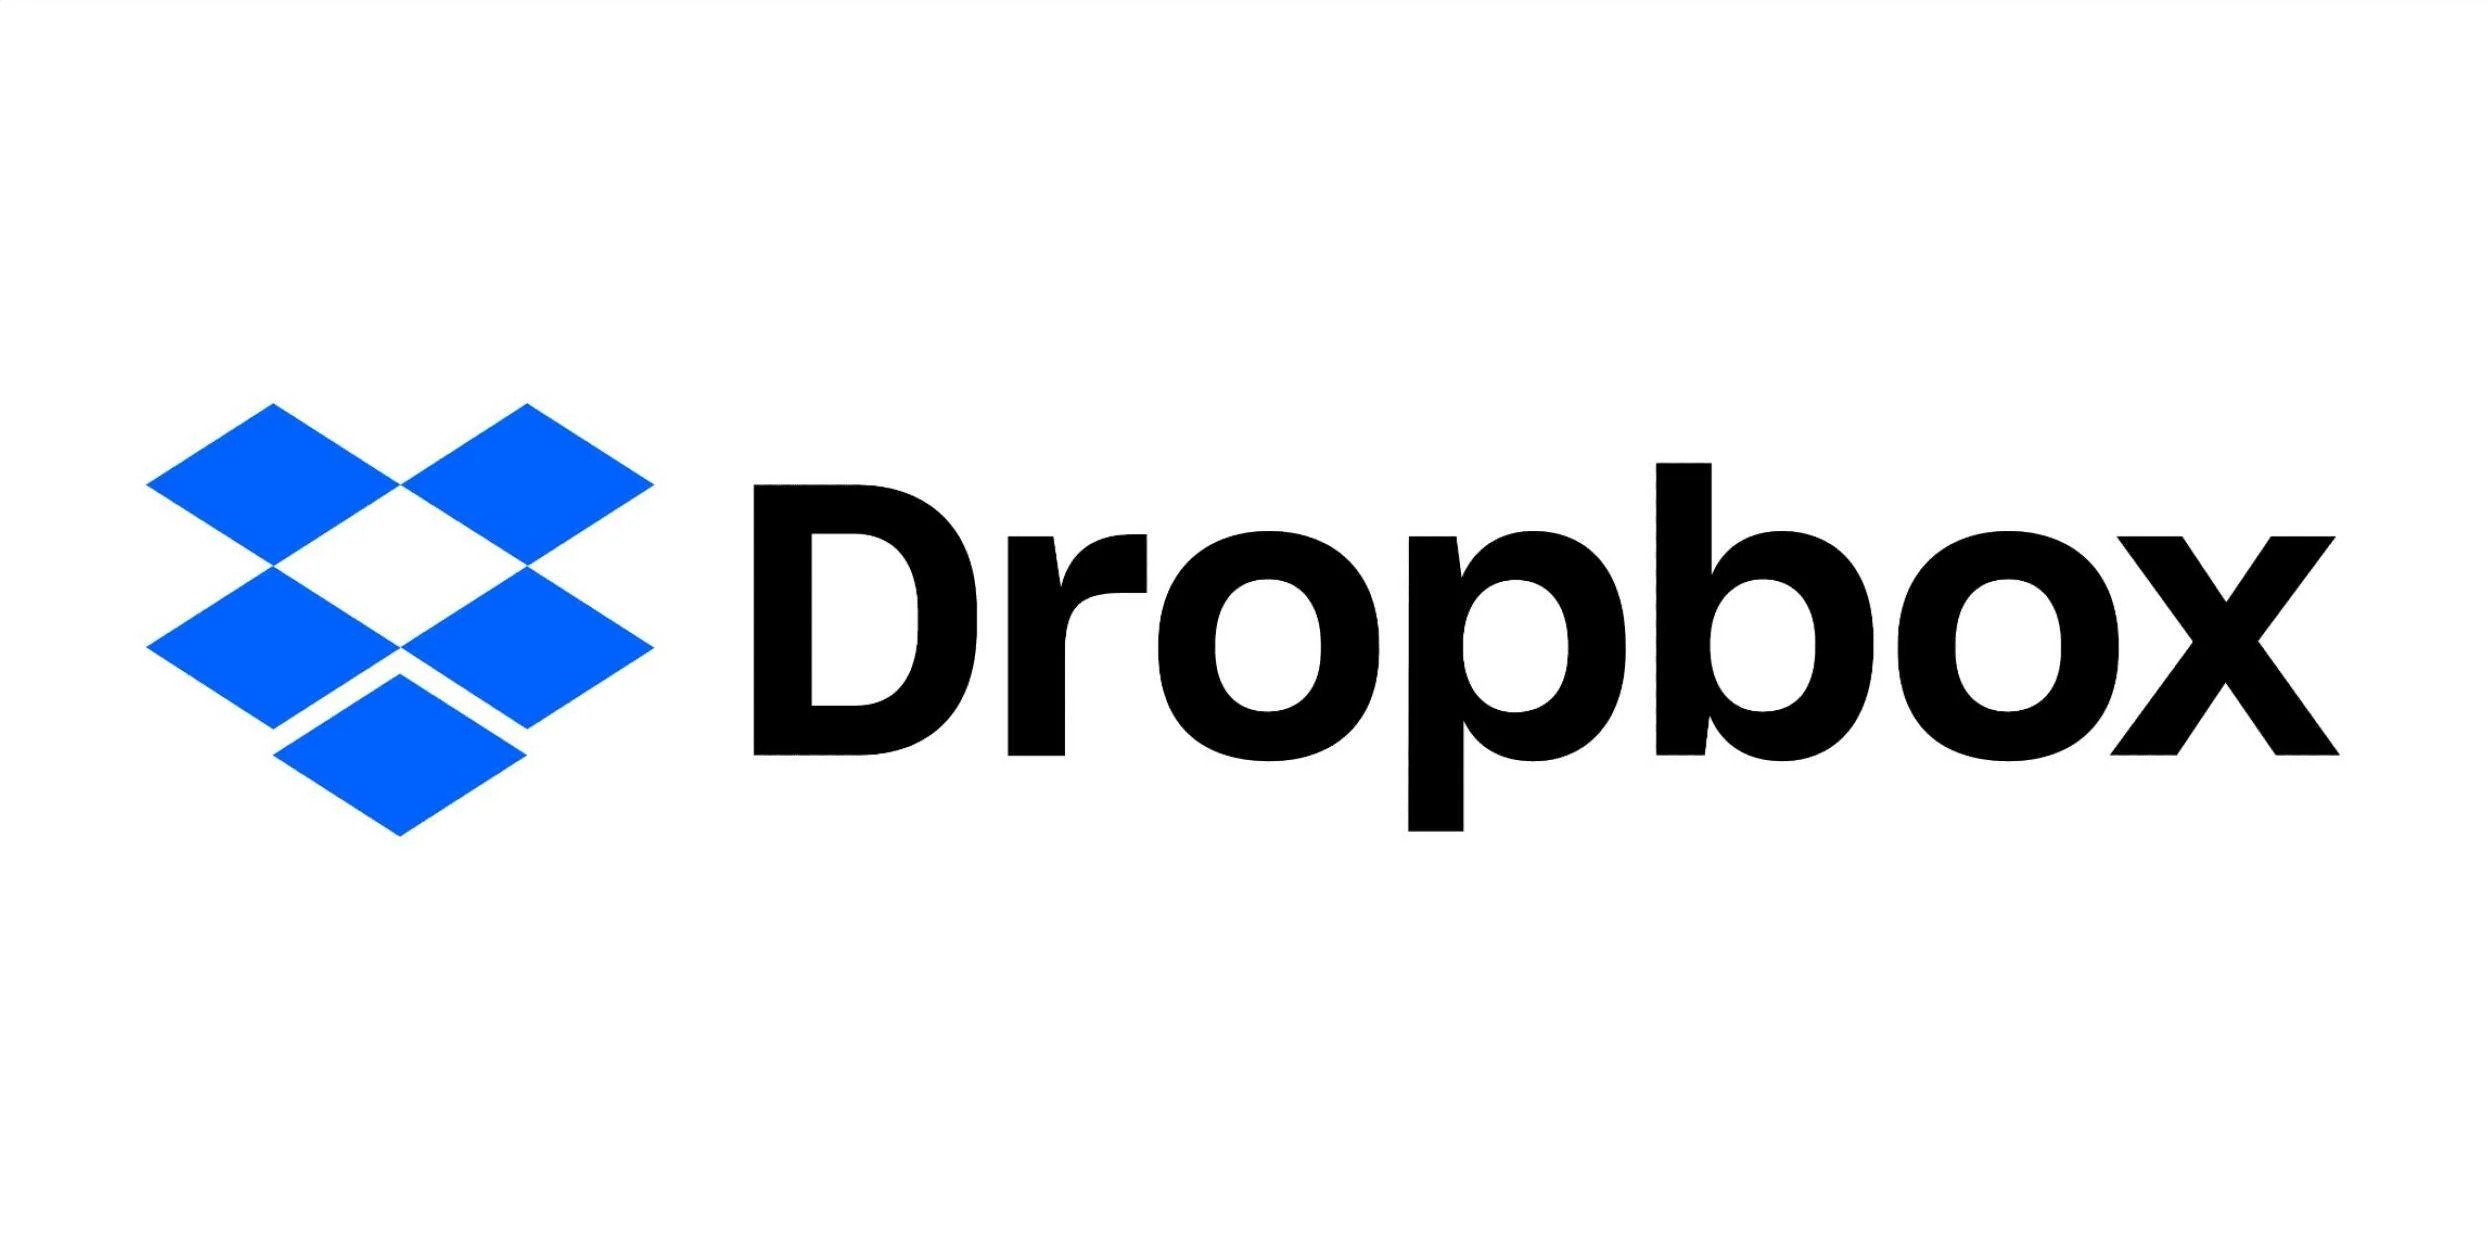 How To Download Dropbox Photos Using Tubidy